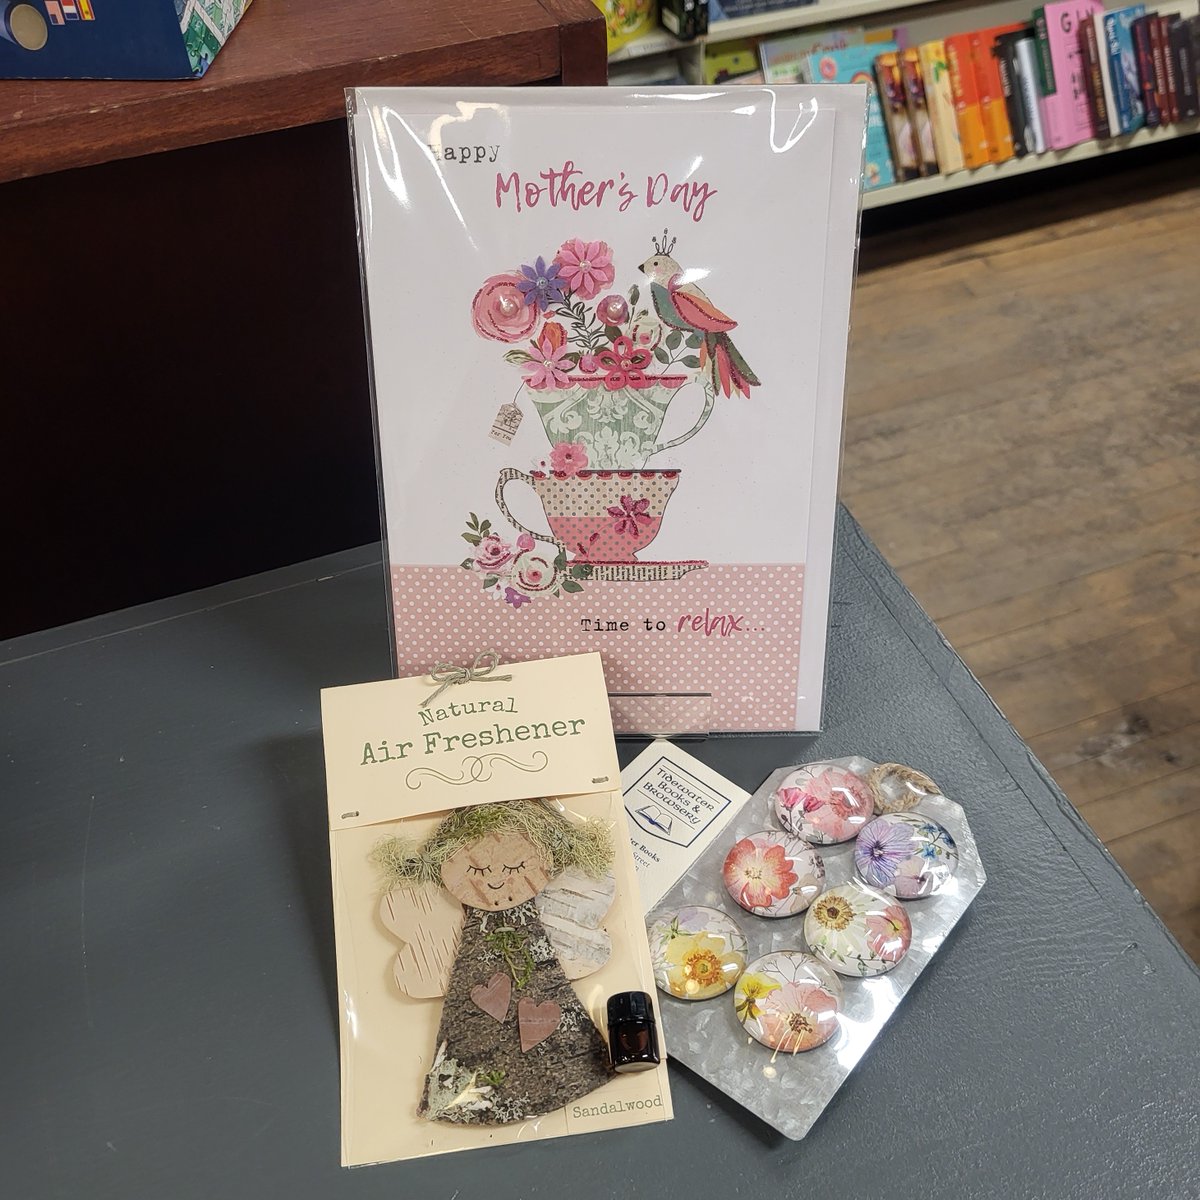 Melanie Best has made some beautiful bark natural air fresheners, ideal little add on to a Mother's Day card!

Visit us in person or online at tidewaterbooks.ca! 💕🇨🇦📚

#IReadCanadian #ShopSmall #ShopLocal #ShopNB #ShopIndie #BookLovers #IndieBookstores #SackvilleNB